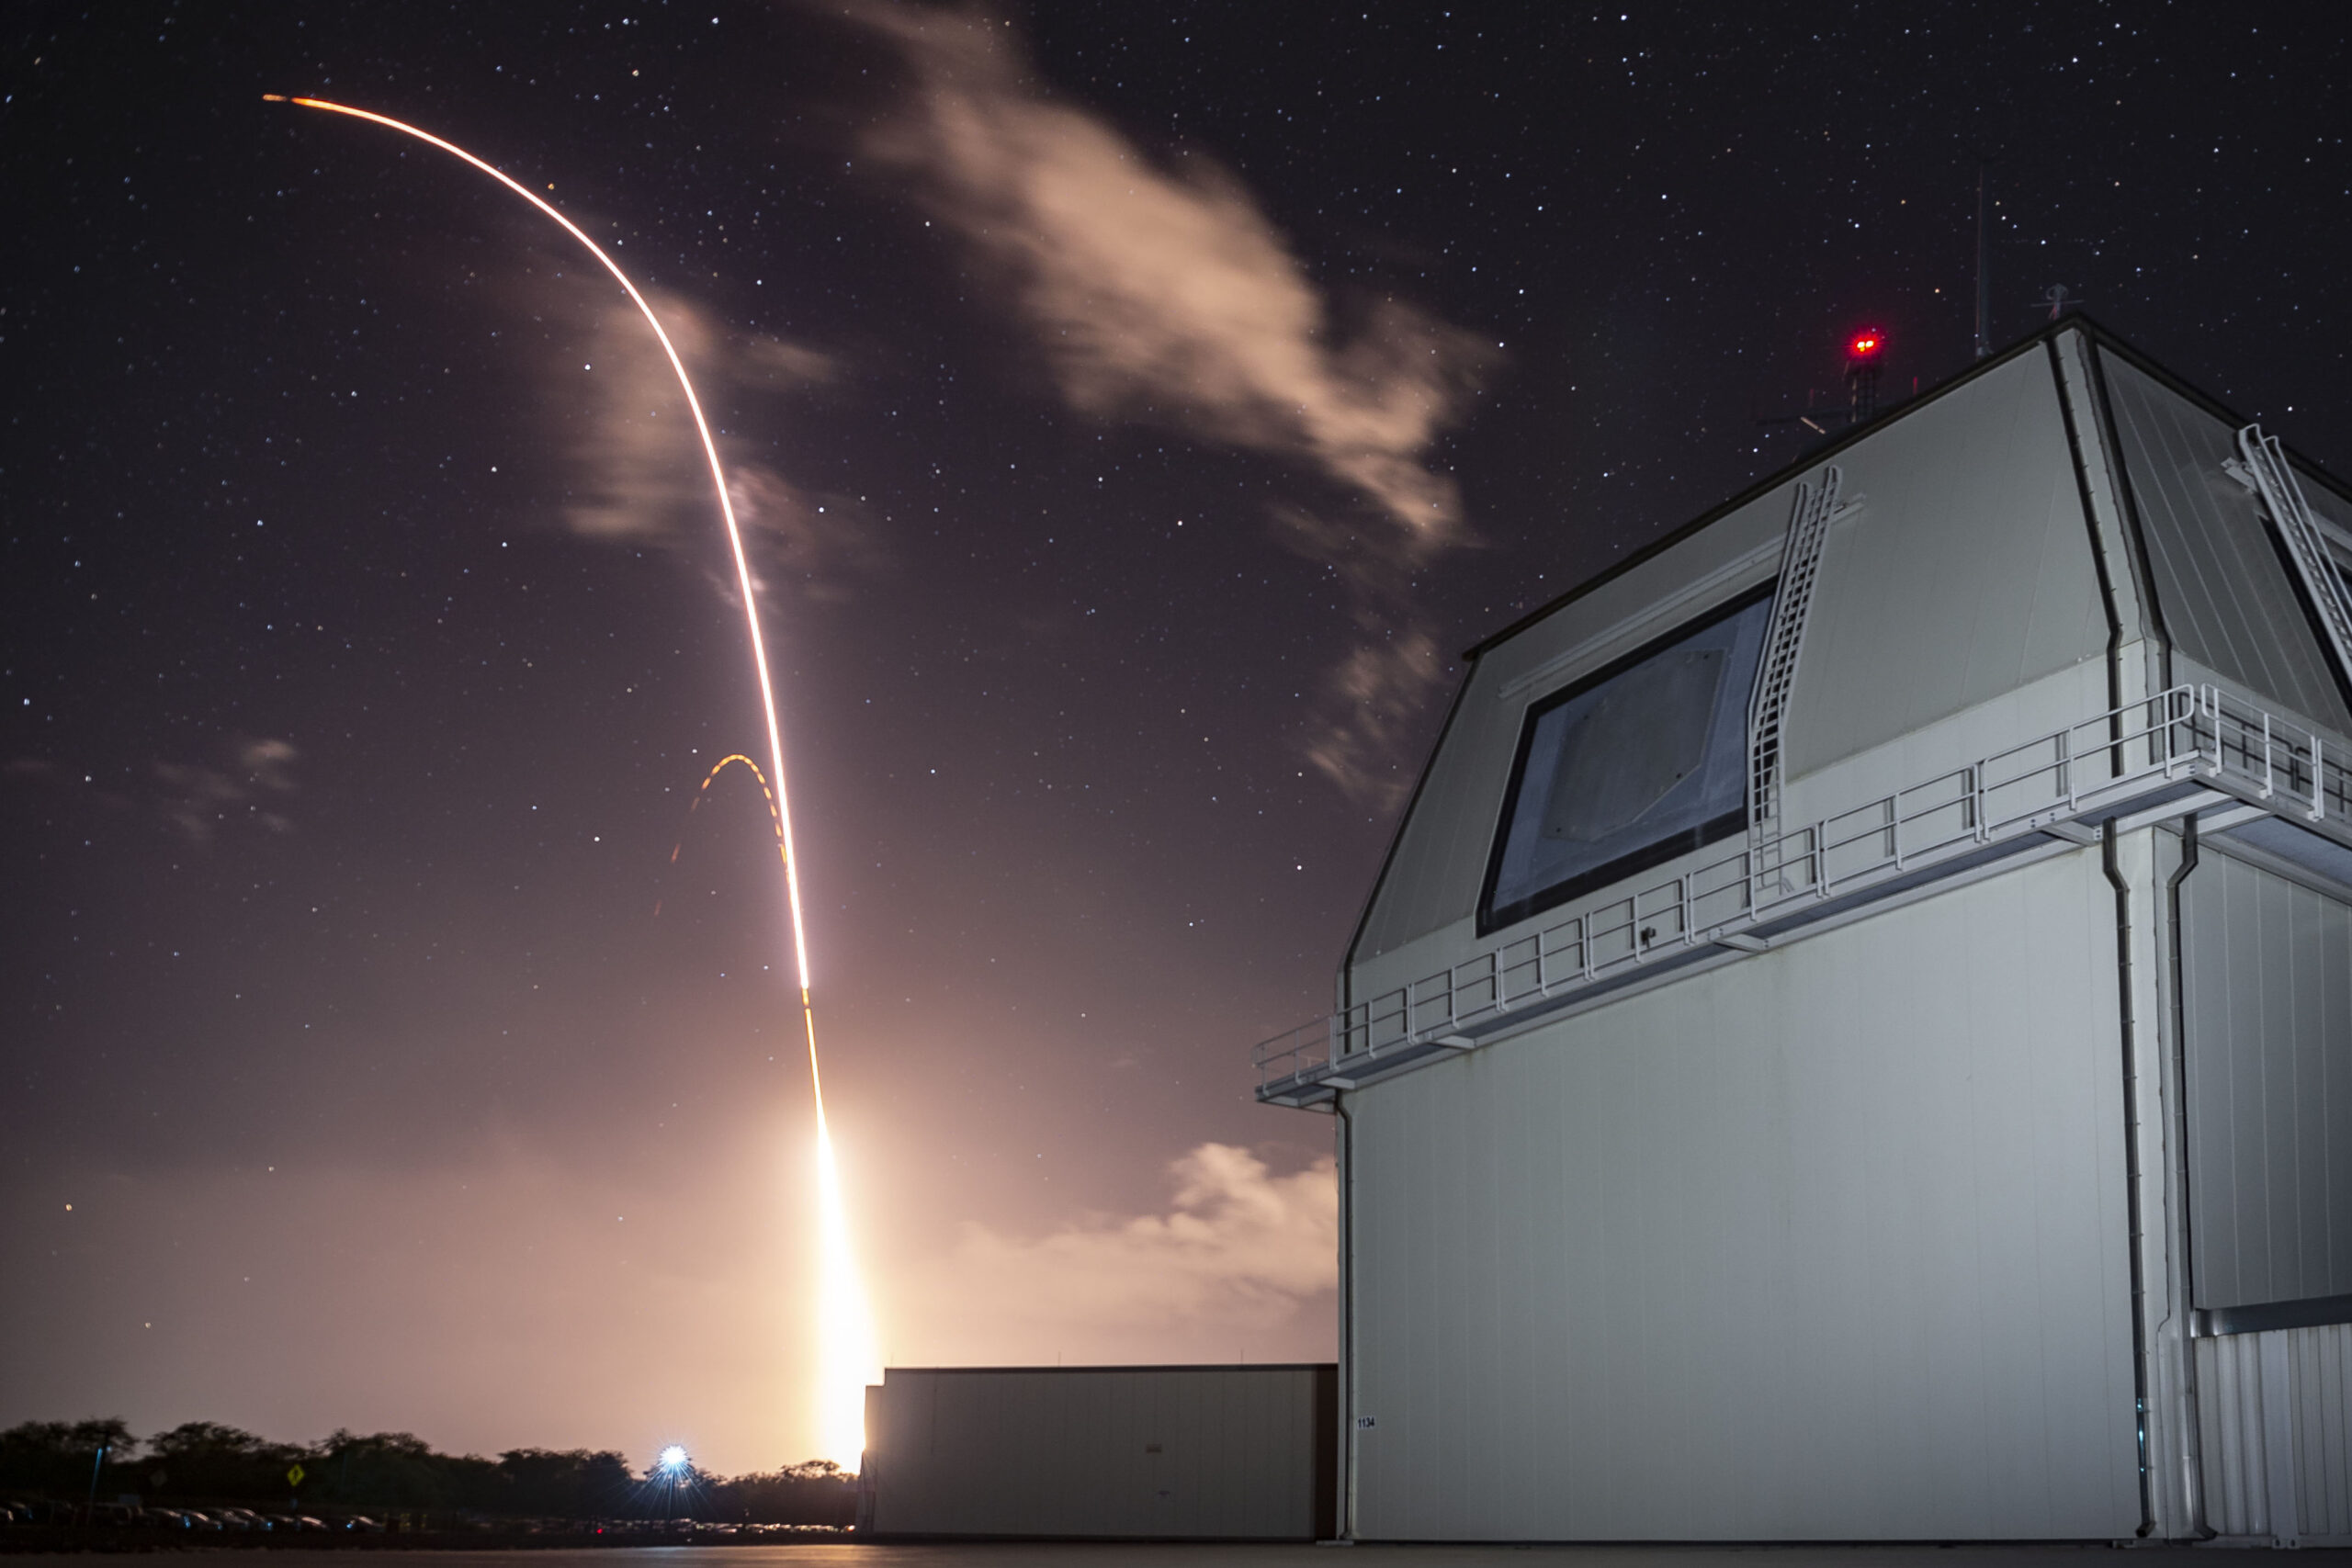 A Standard Missile-3 Block IIA missile launches from the Aegis Ashore Missile Defense Test Complex at Pacific Missile Range Facility in Kauai, Hawaii, Dec. 10, 2018.